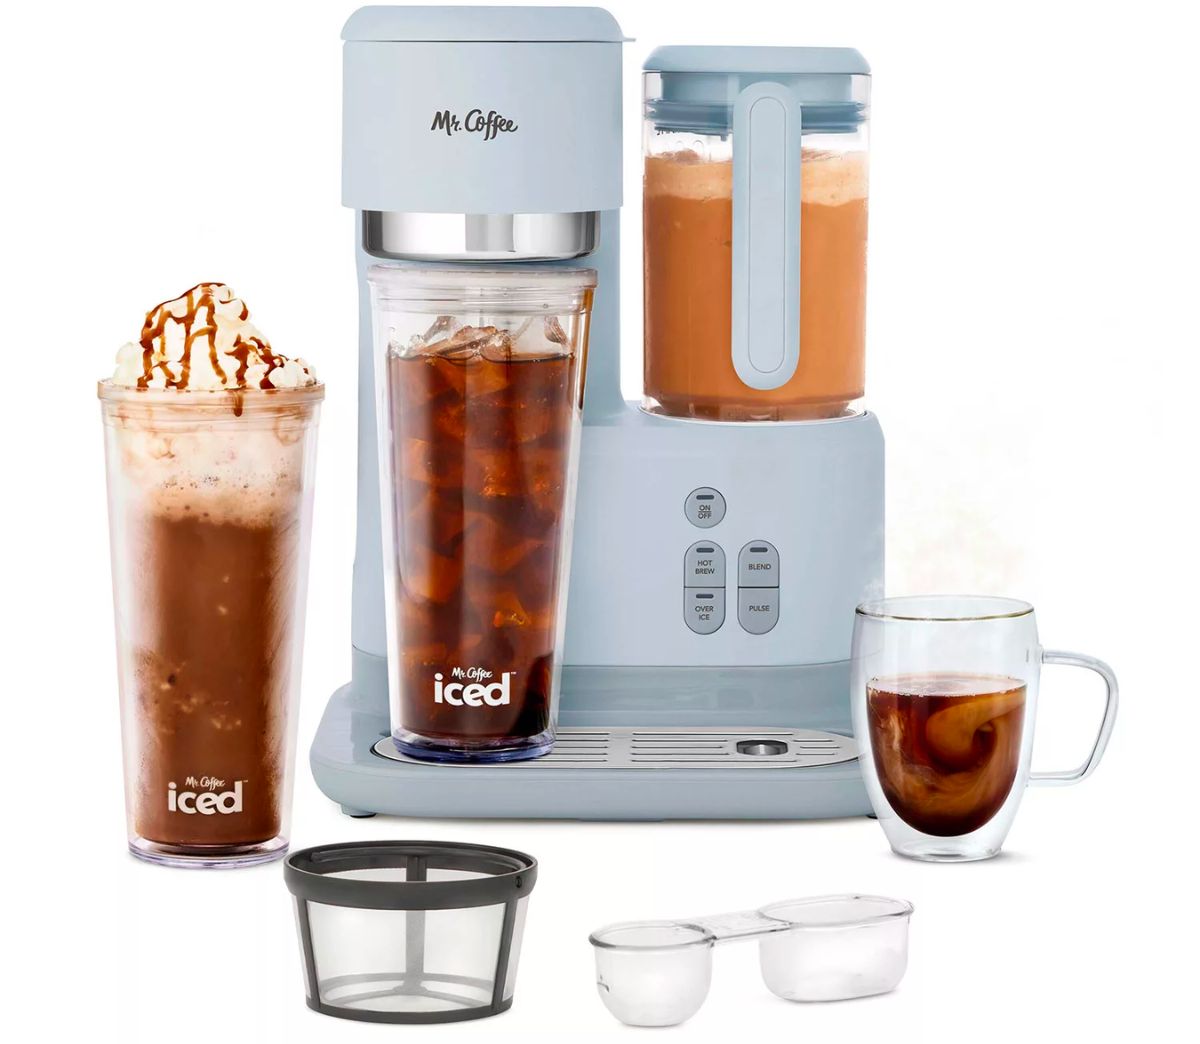 Mr. Coffee Single-Serve Frappe, Iced, and Hot Coffee Maker shown with included accessories stock image